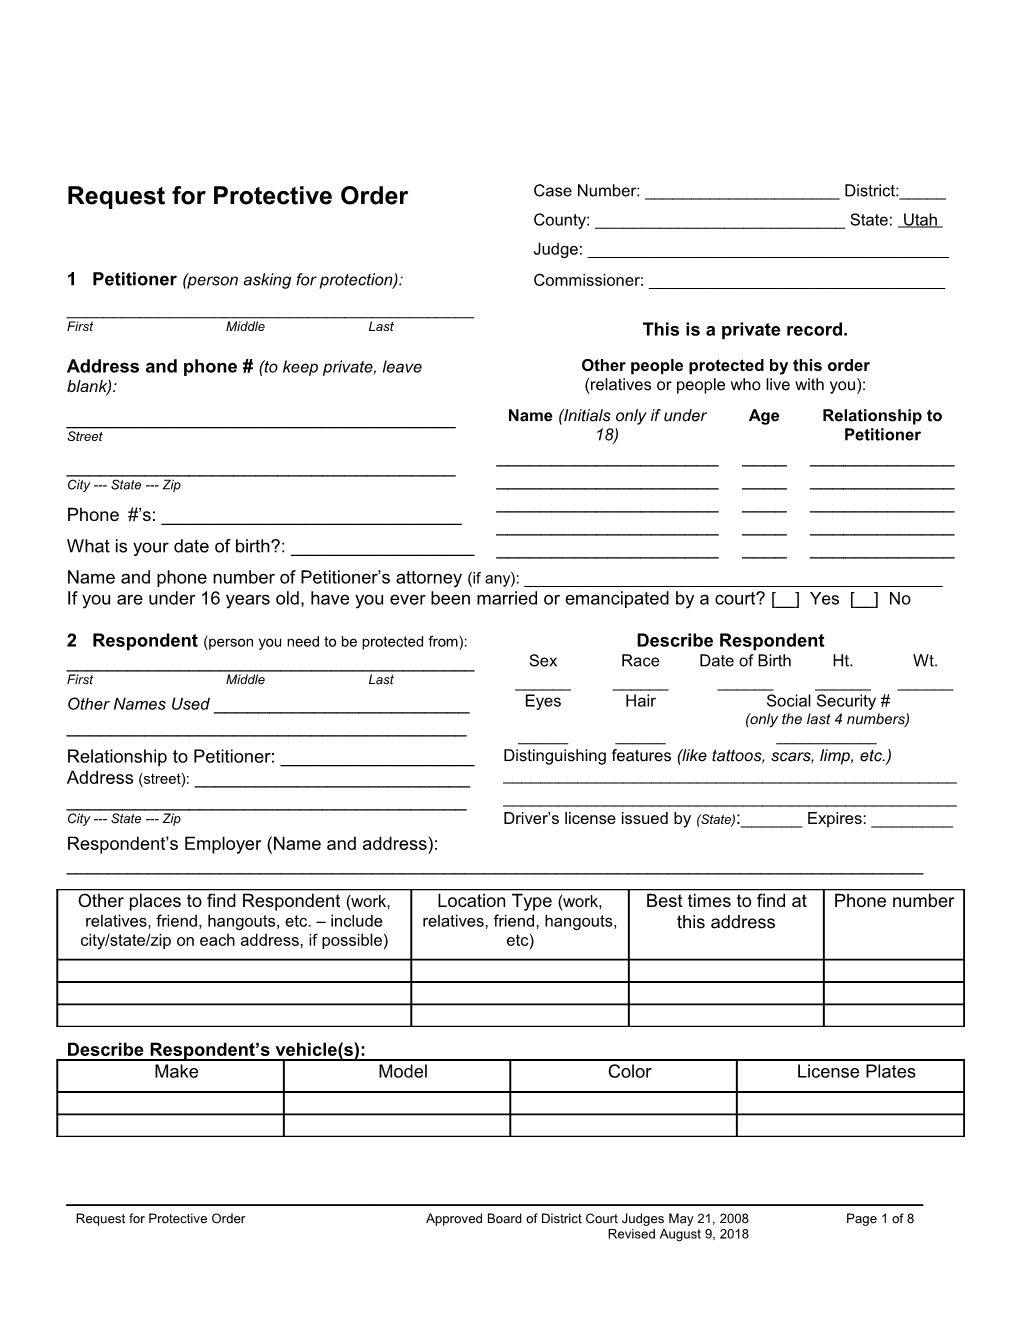 Request for Protective Order